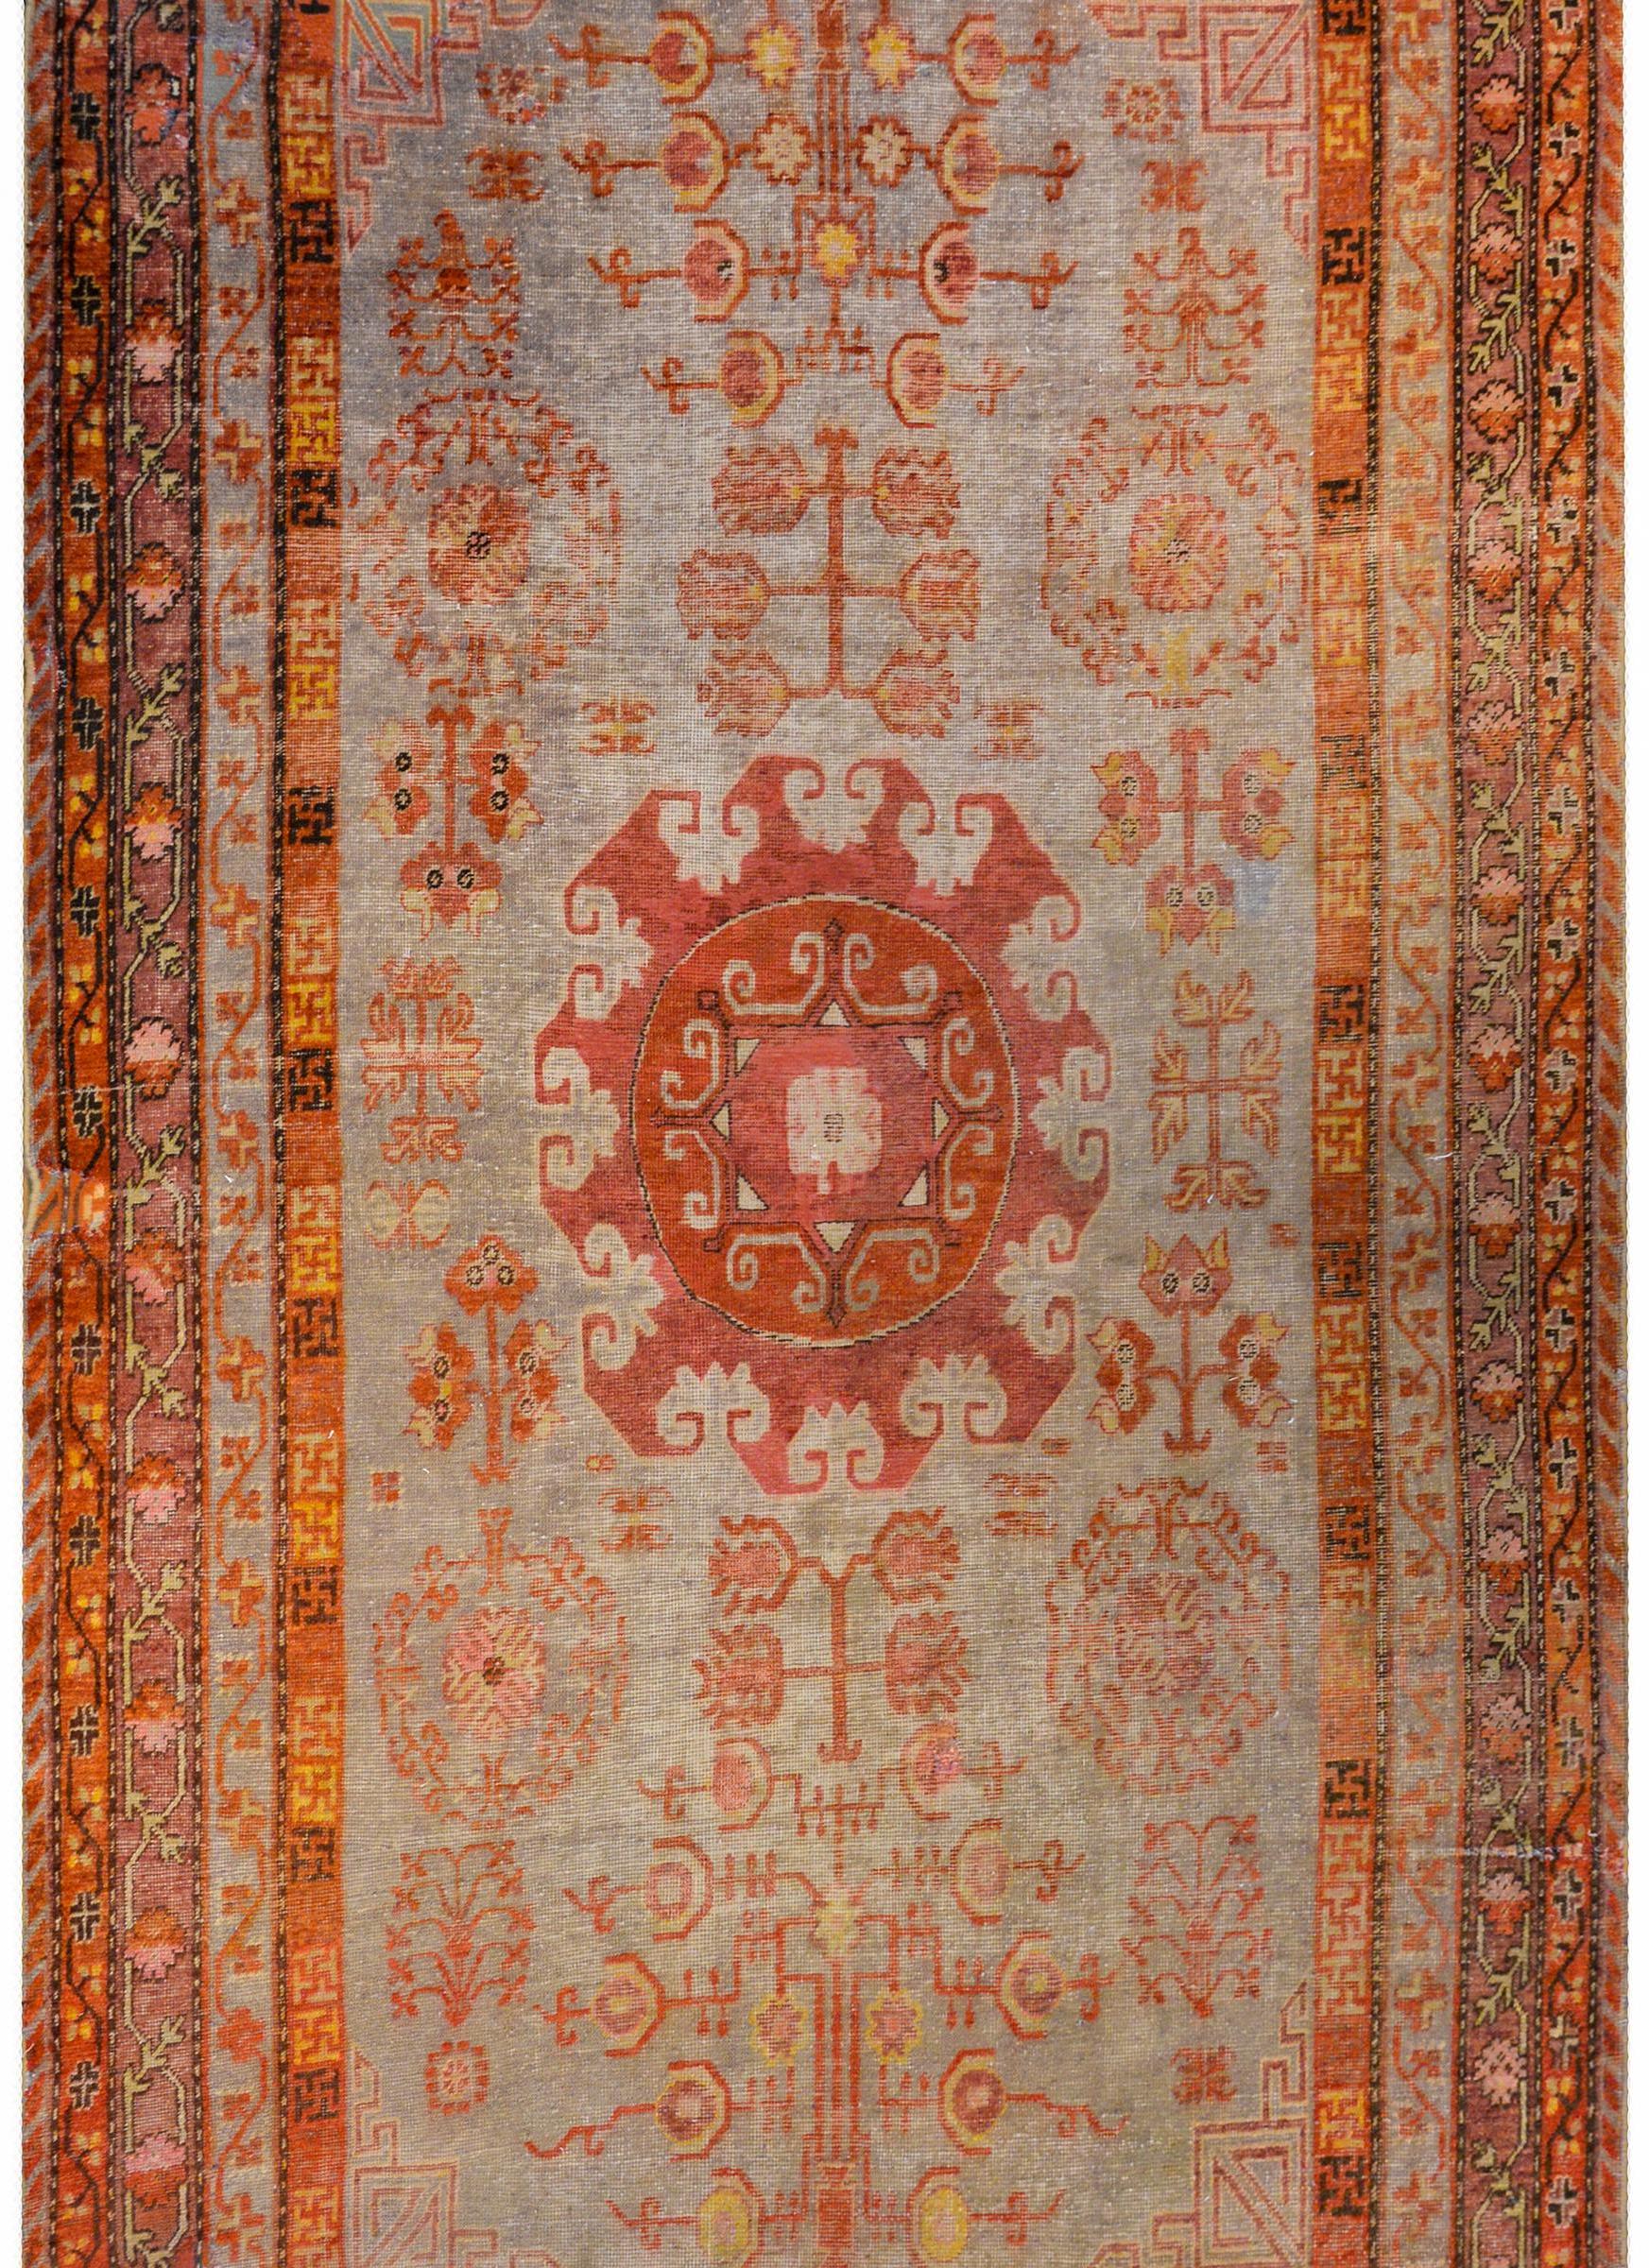 An exceptional early 20th century Central Asian Samarghand rug with a wonderful large stylized floral central medallion woven in crimson and fuchsia amidst a field of flowers and trees-of-life all woven in pale crimson, fuchsia, gold, and white on a